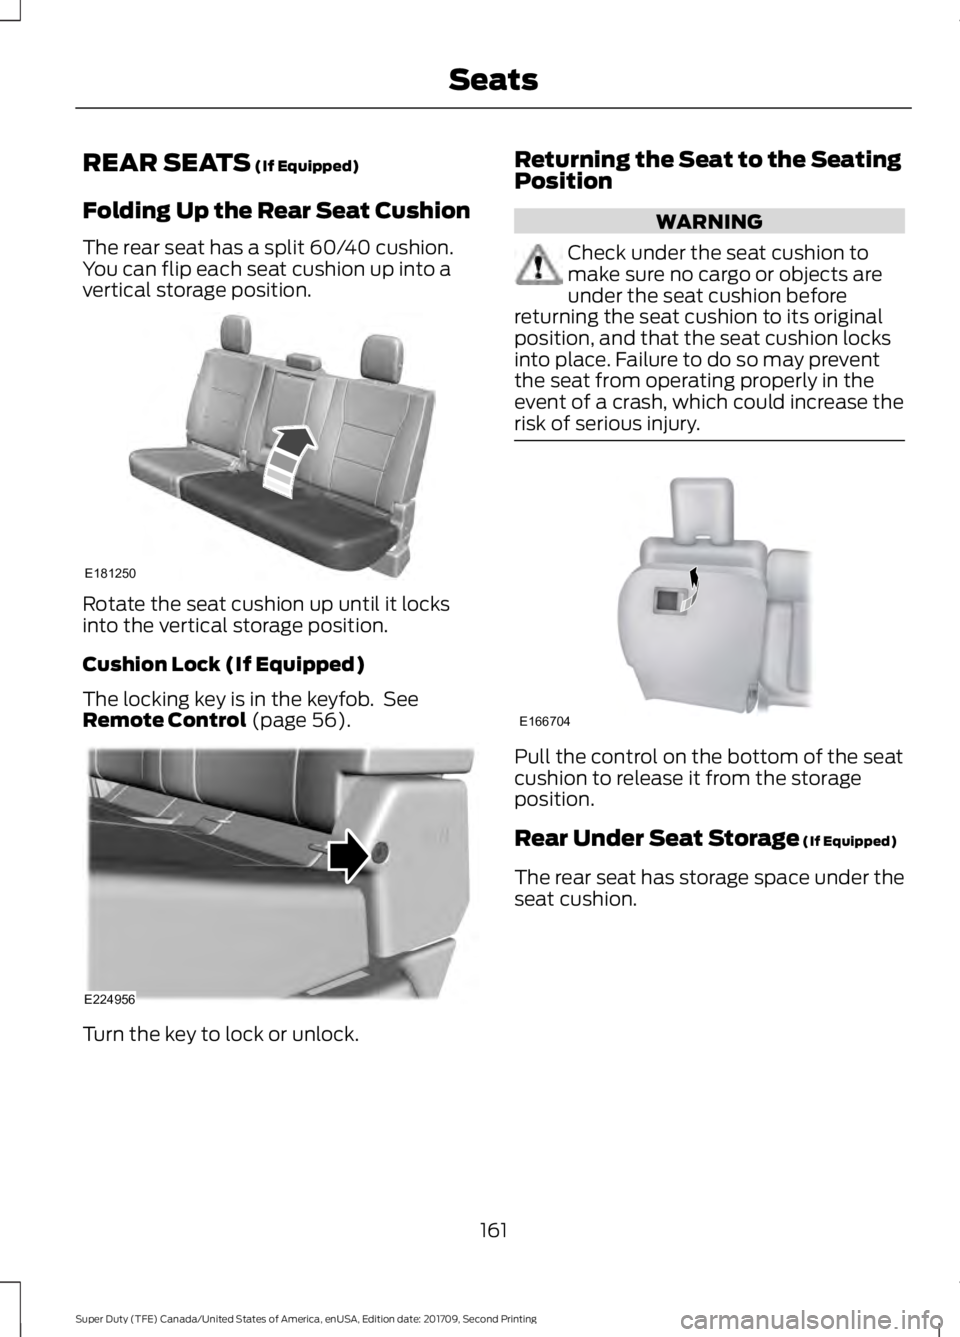 FORD F-450 2018  Owners Manual REAR SEATS (If Equipped)
Folding Up the Rear Seat Cushion
The rear seat has a split 60/40 cushion.
You can flip each seat cushion up into a
vertical storage position. Rotate the seat cushion up until 